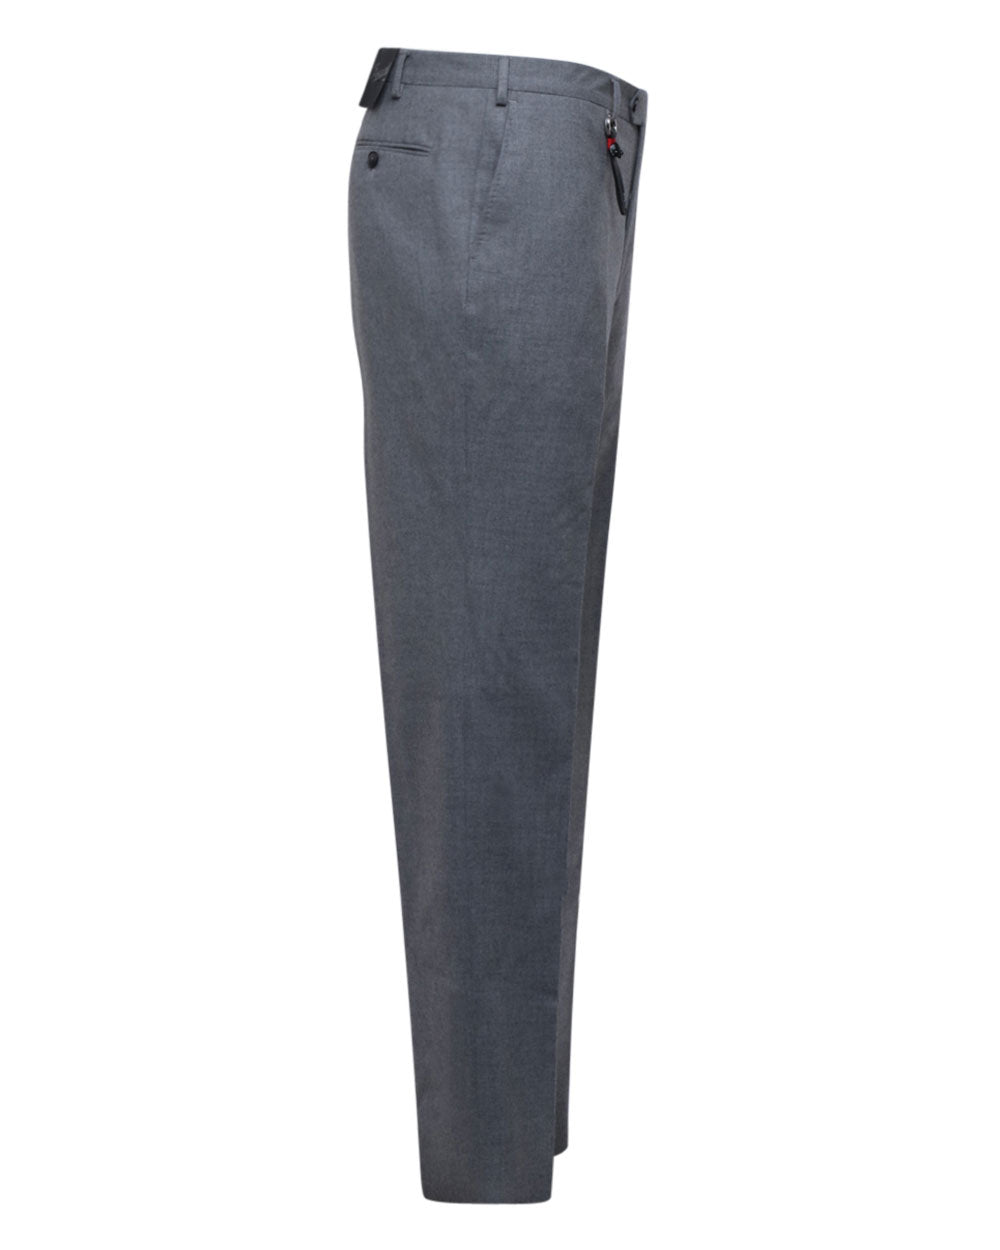 Cashmere Dress Pant in Mid Grey